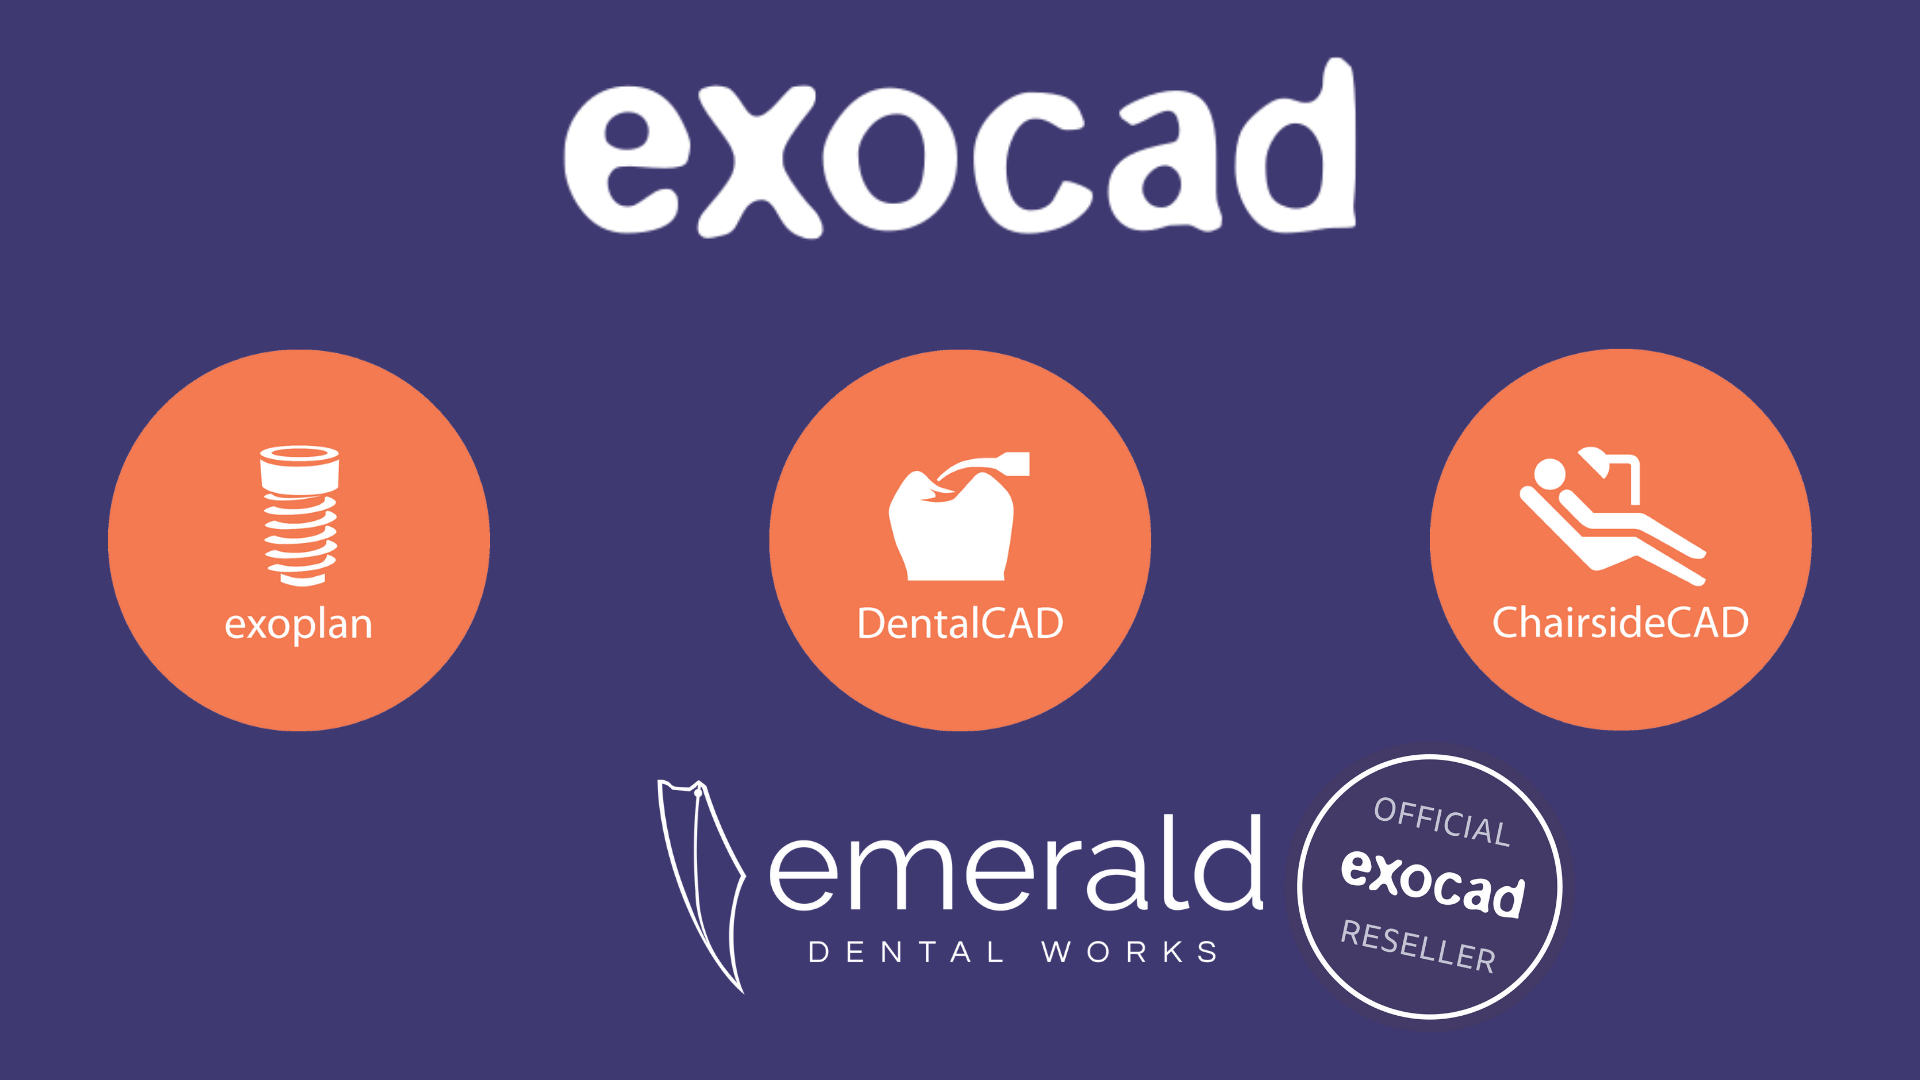 An Exclusive Exocad Offer for Seattle Study Club Members